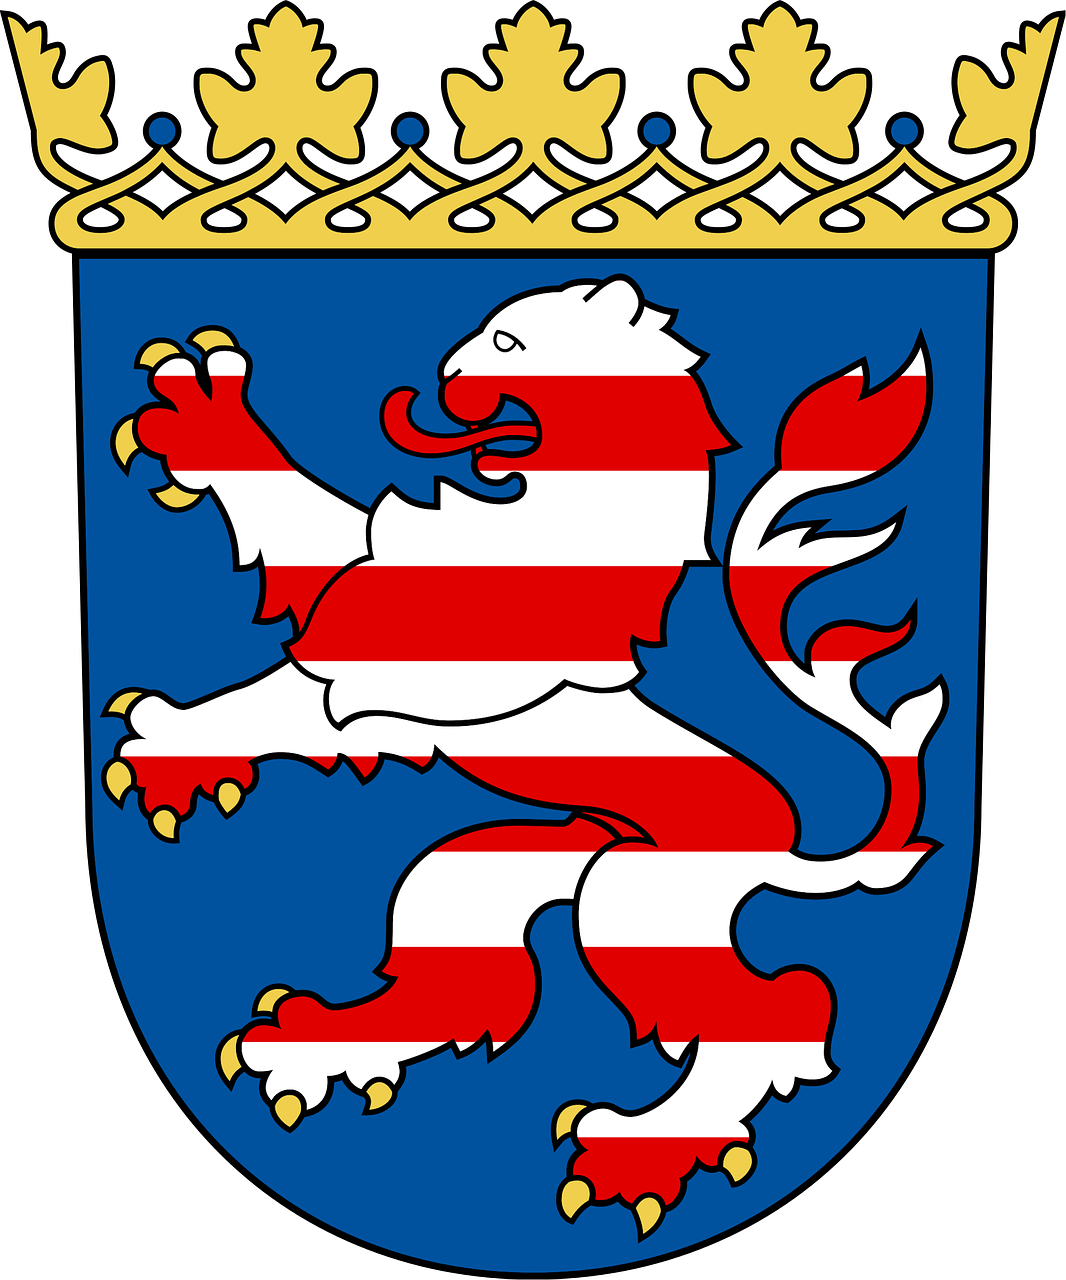 coat of arms hesse germany free photo